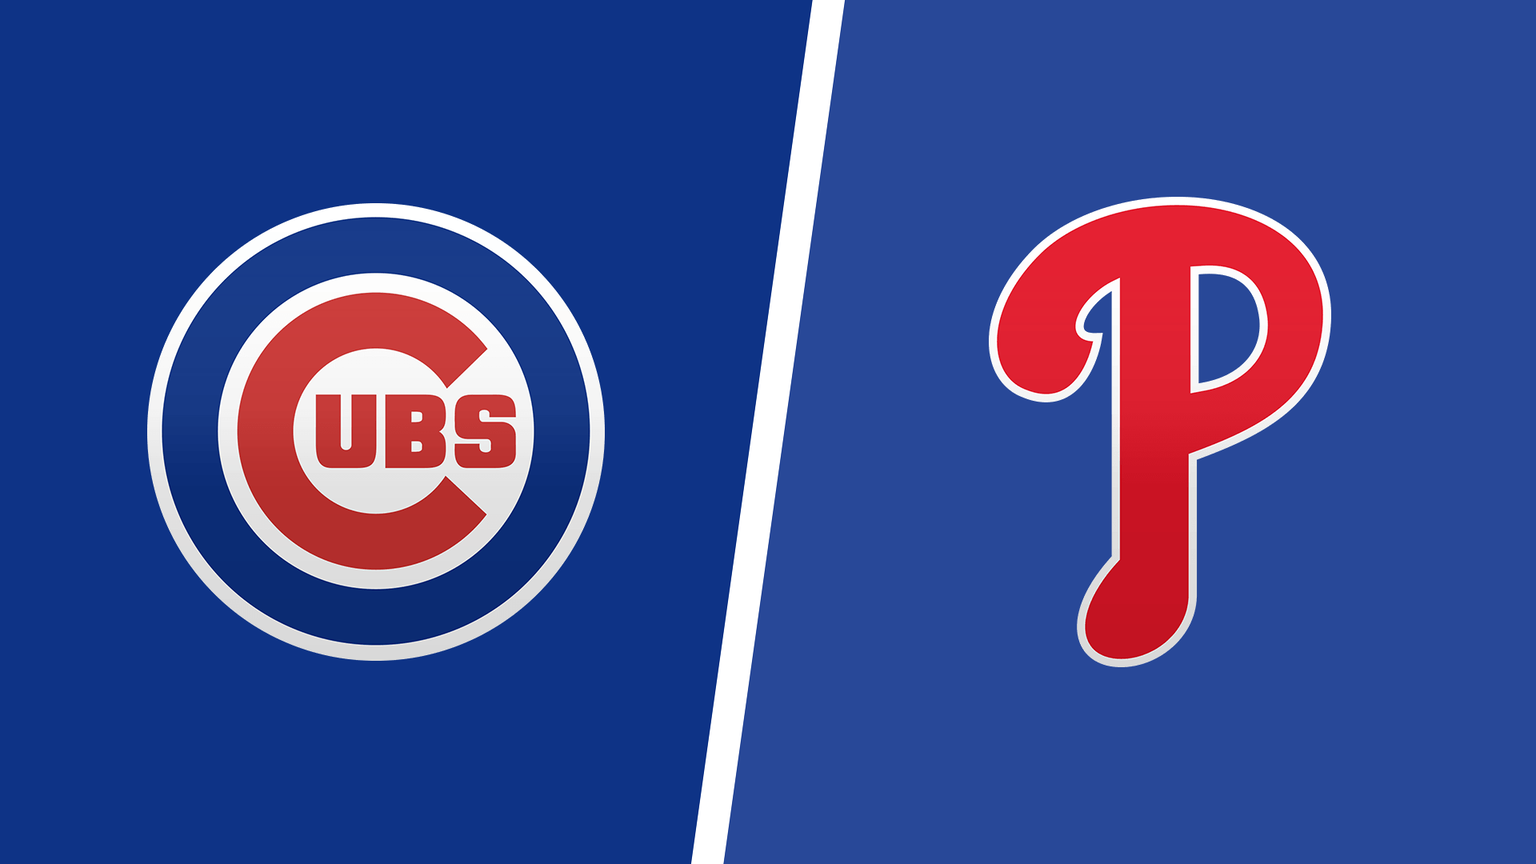 How to Watch Philadelphia Phillies vs. Chicago Cubs Live Online Without